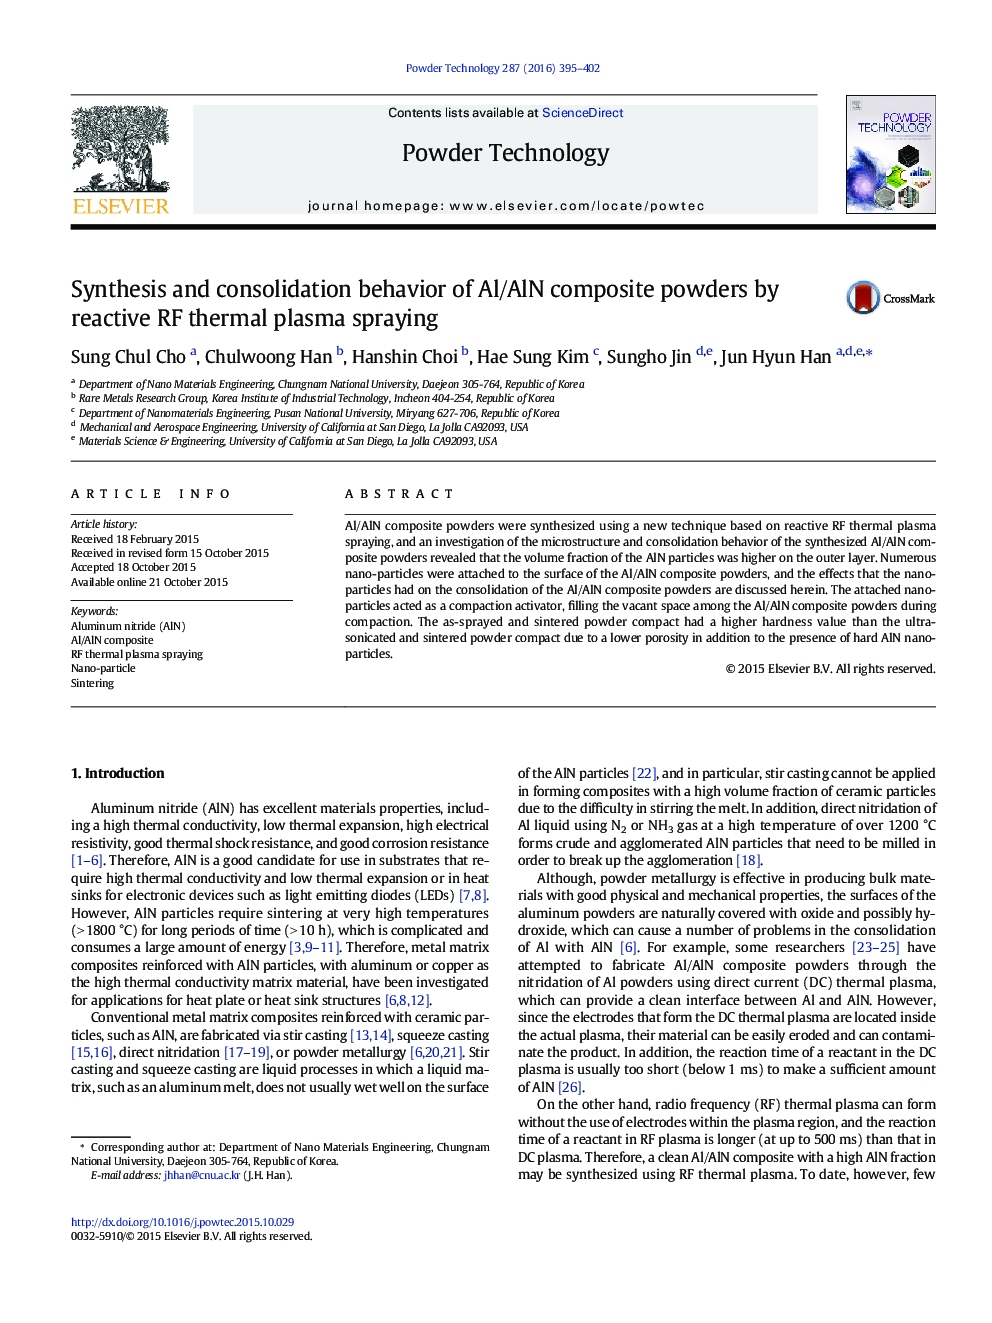 Synthesis and consolidation behavior of Al/AlN composite powders by reactive RF thermal plasma spraying